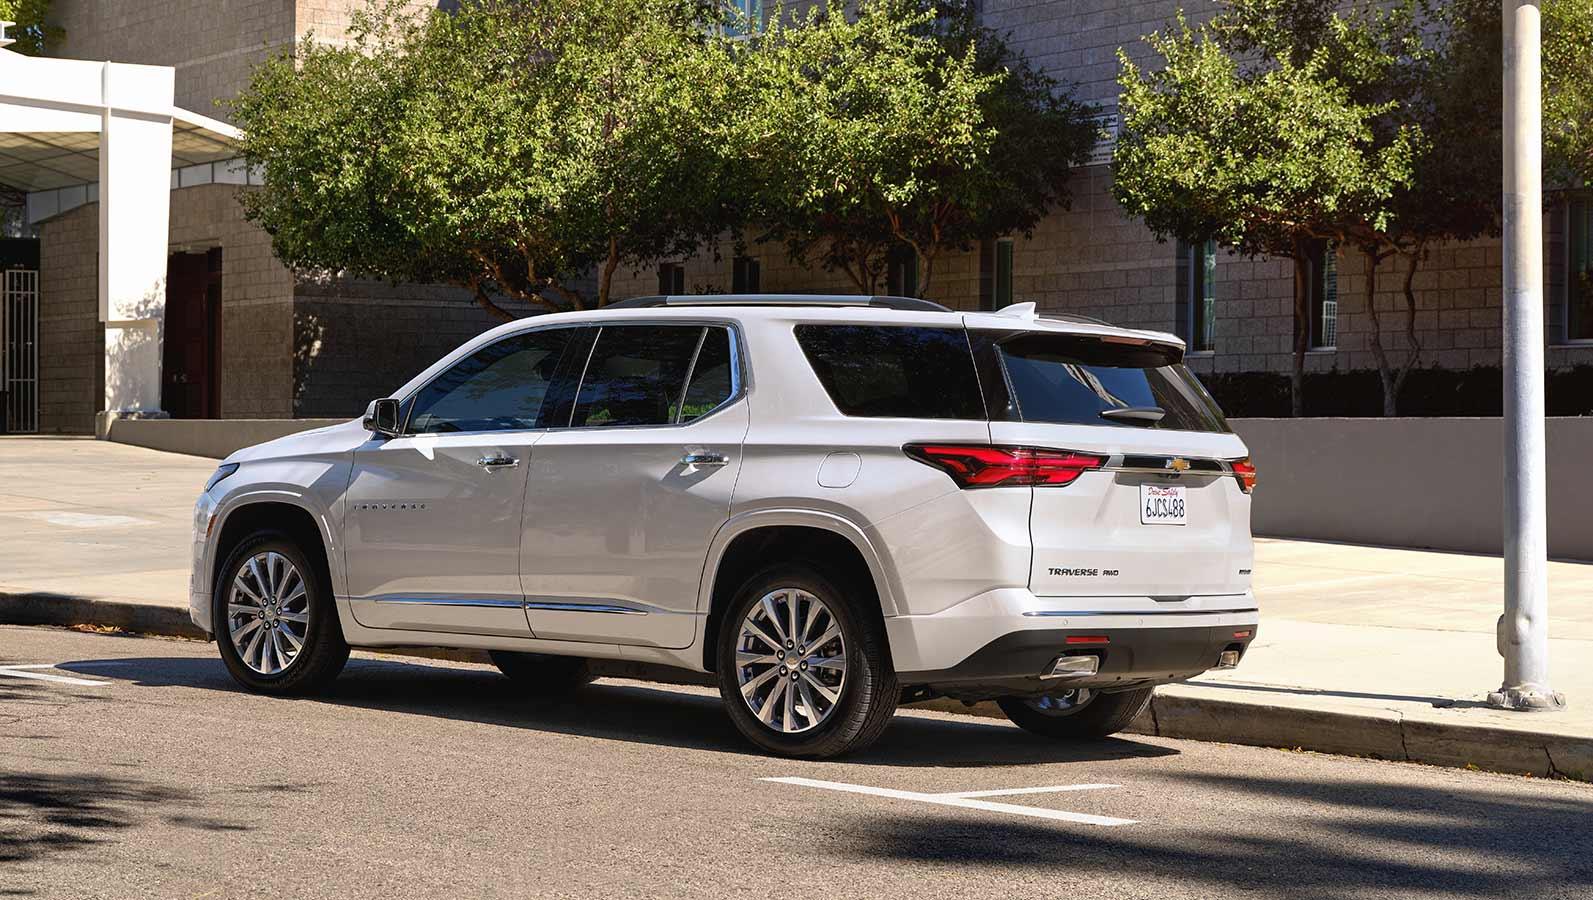 The back view of 2023 Chevrolet Traverse.